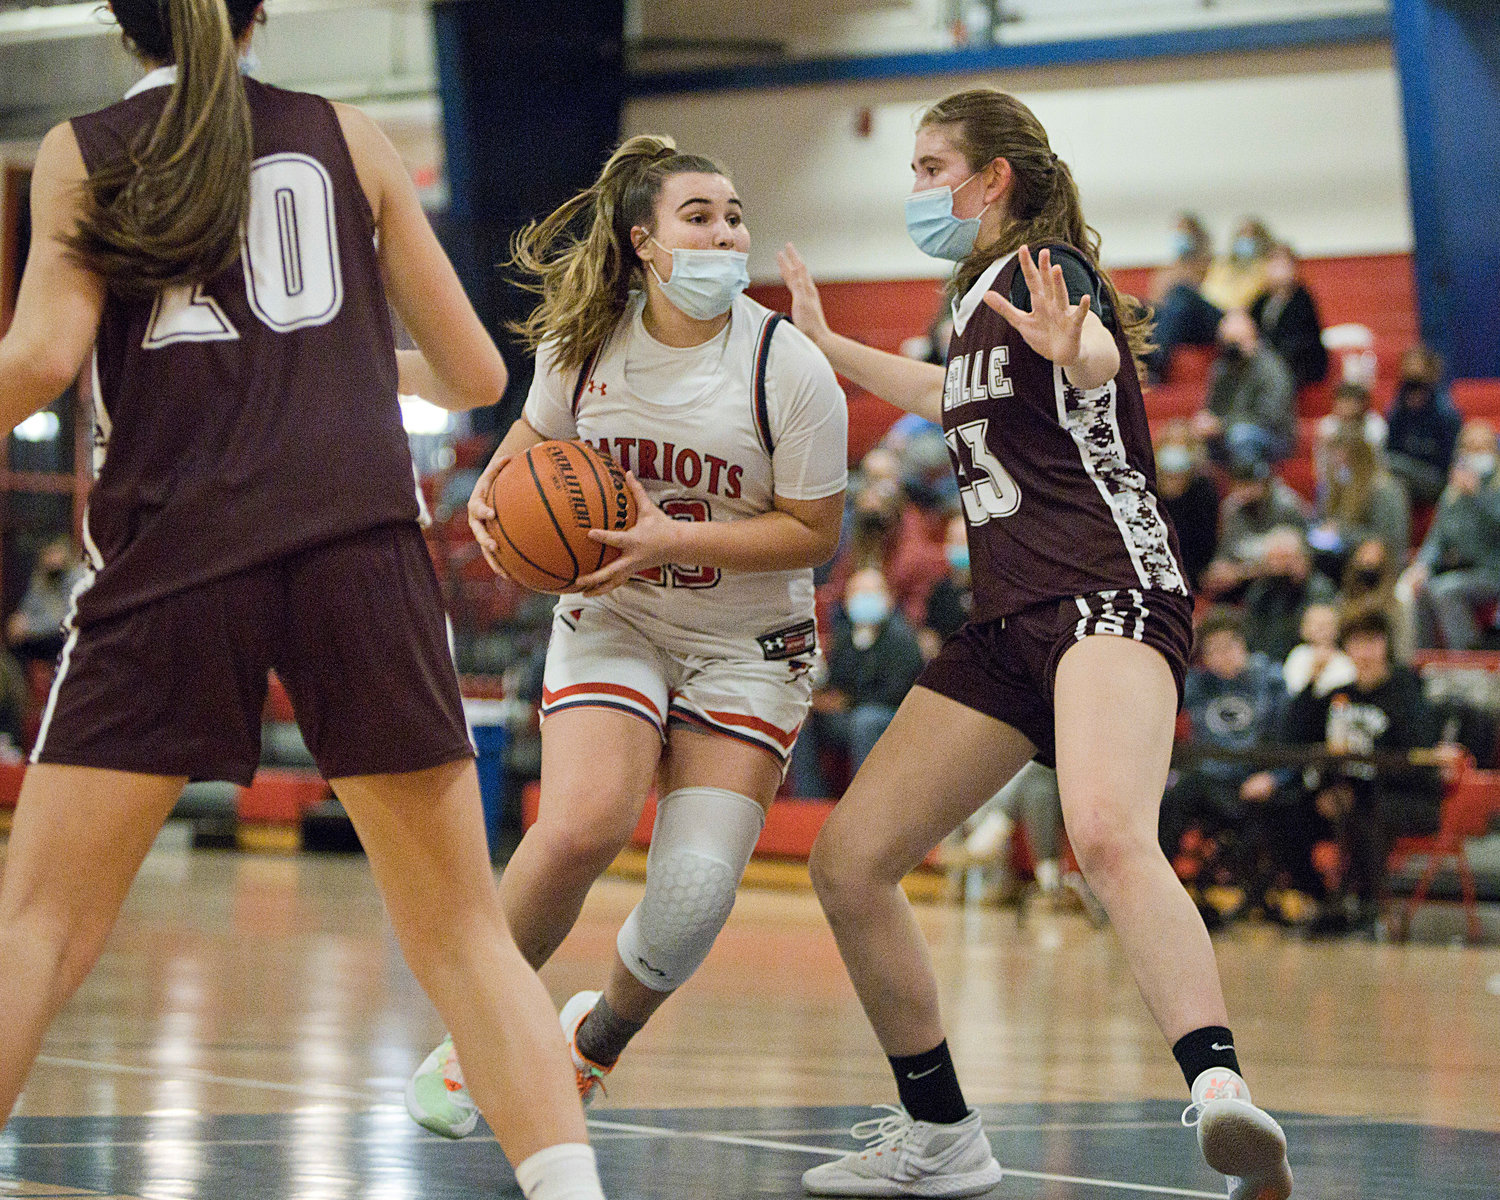 Emily Maiato drives toward the basket during the first half of Friday's game, against La Salle.